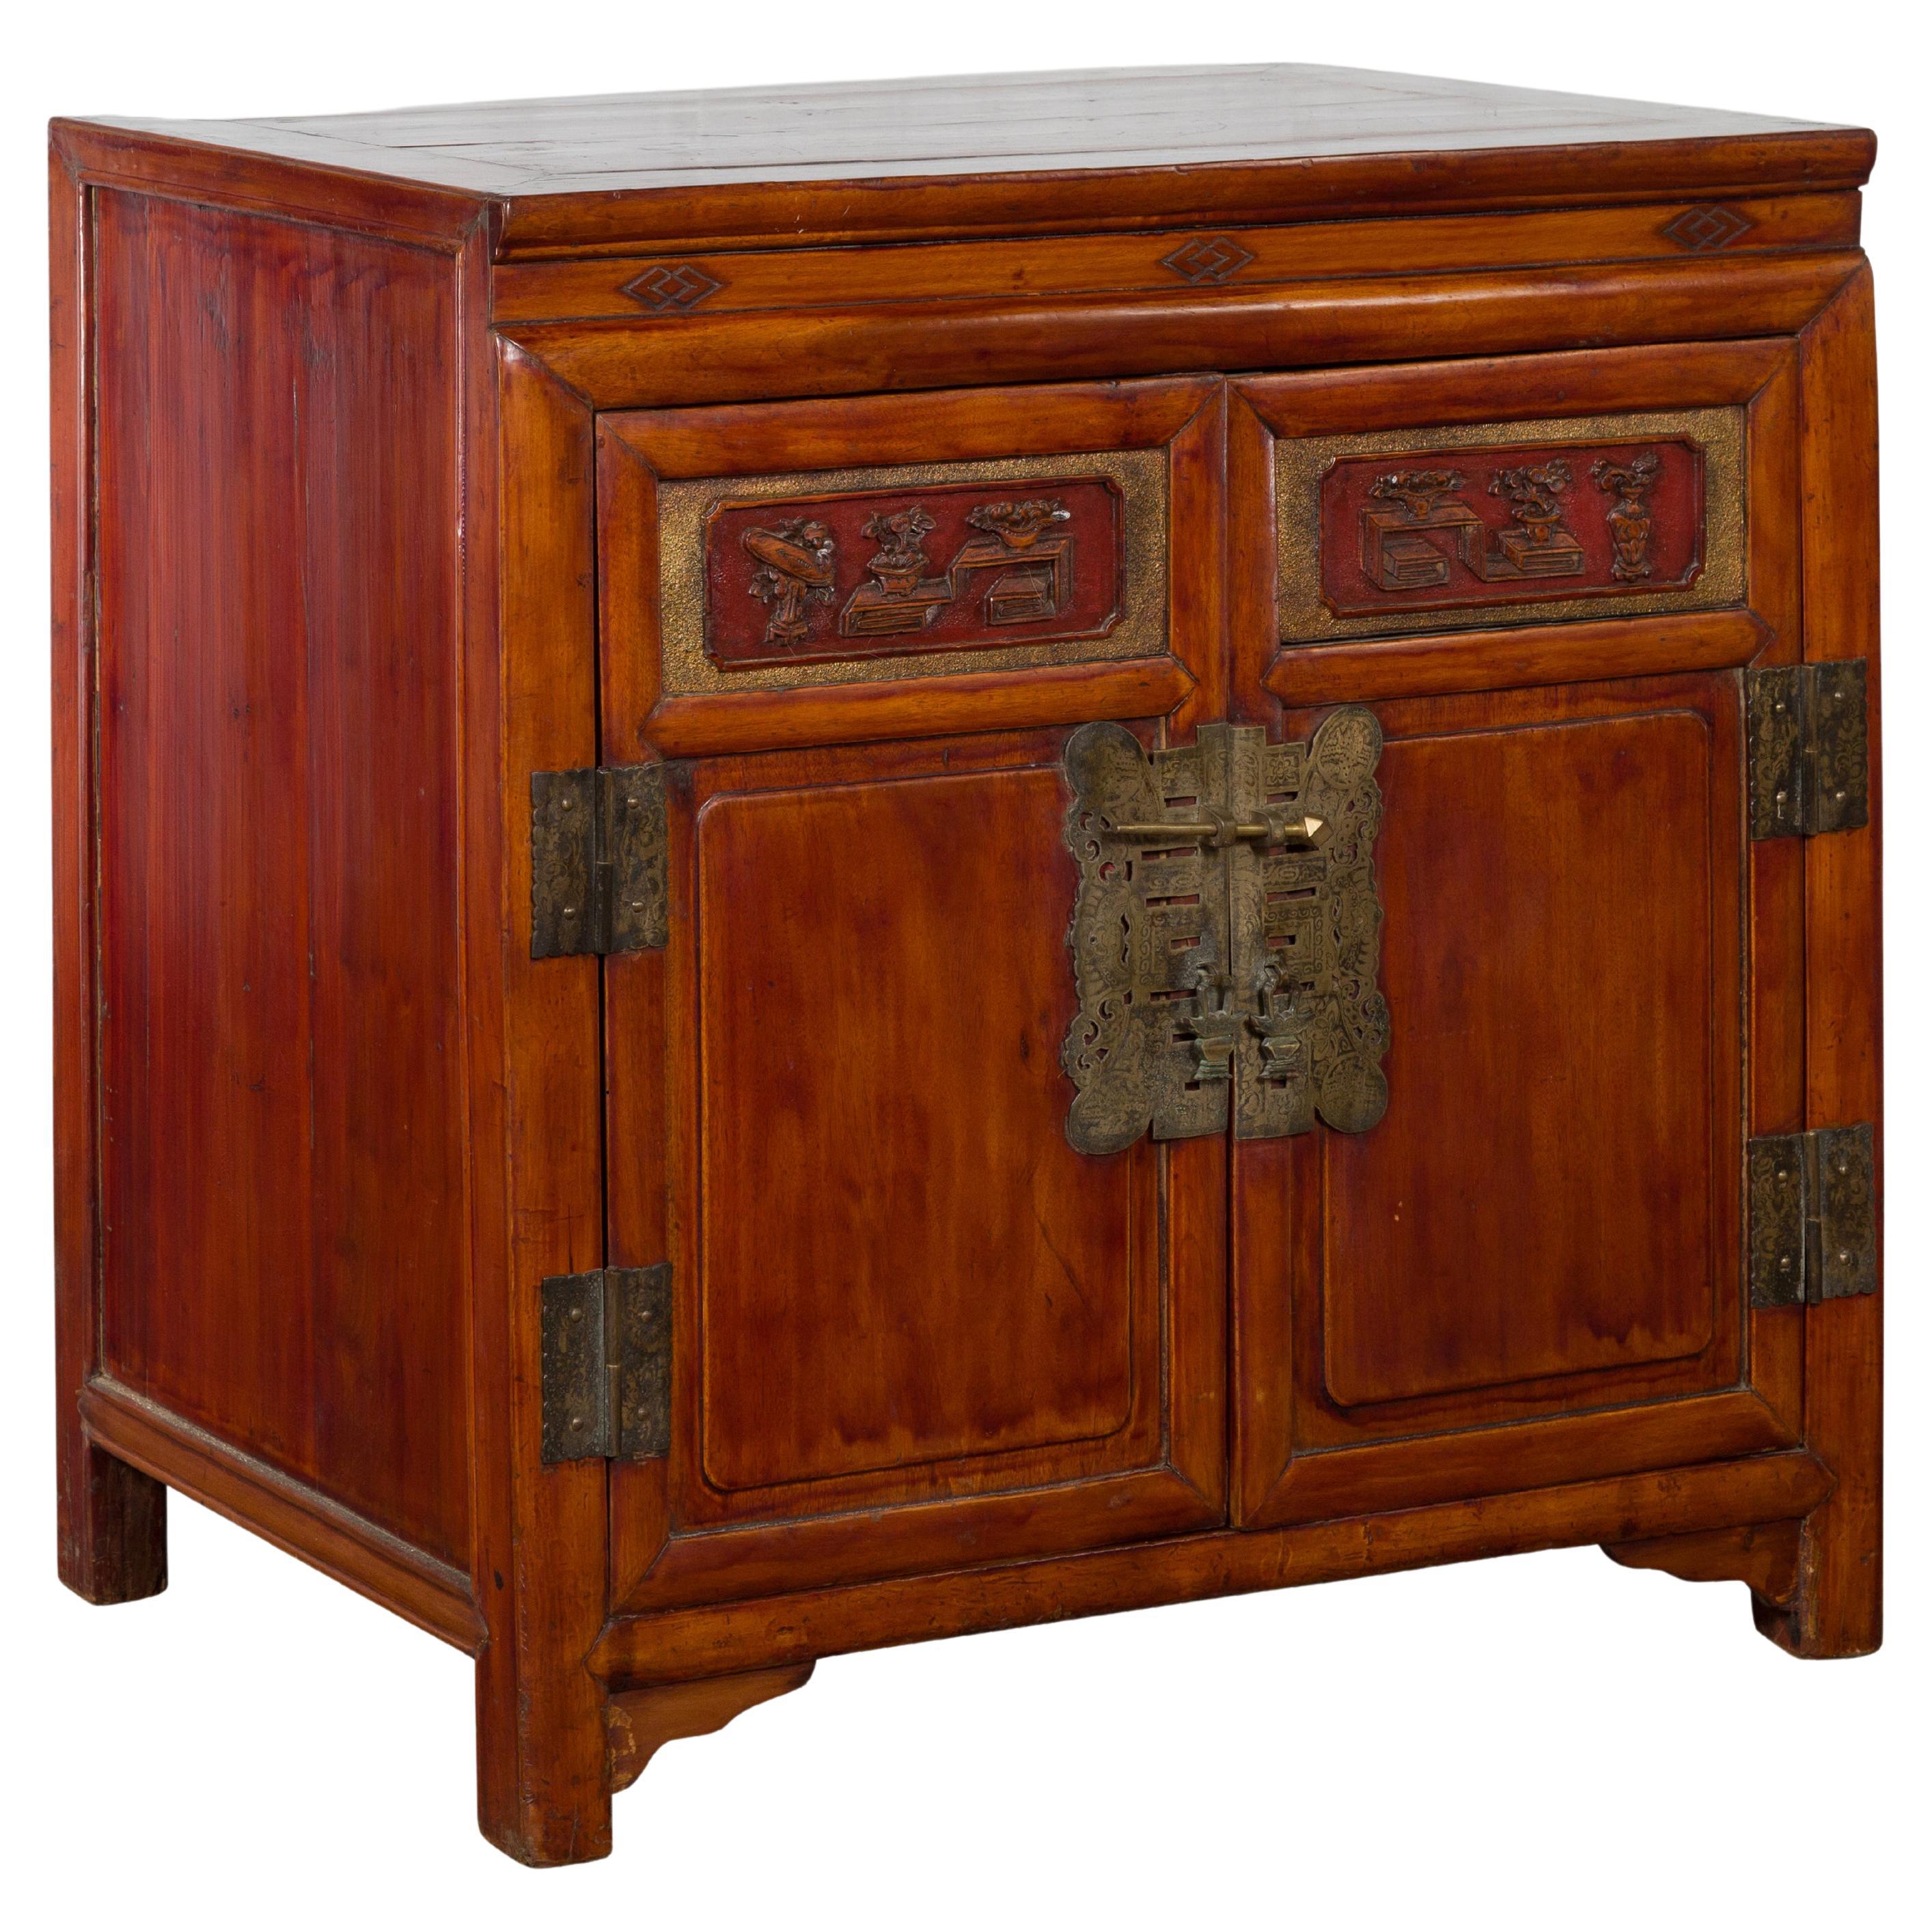 Antique Chinese Side Cabinet with Carved Panels, Gilt Accents and Hidden Drawers For Sale